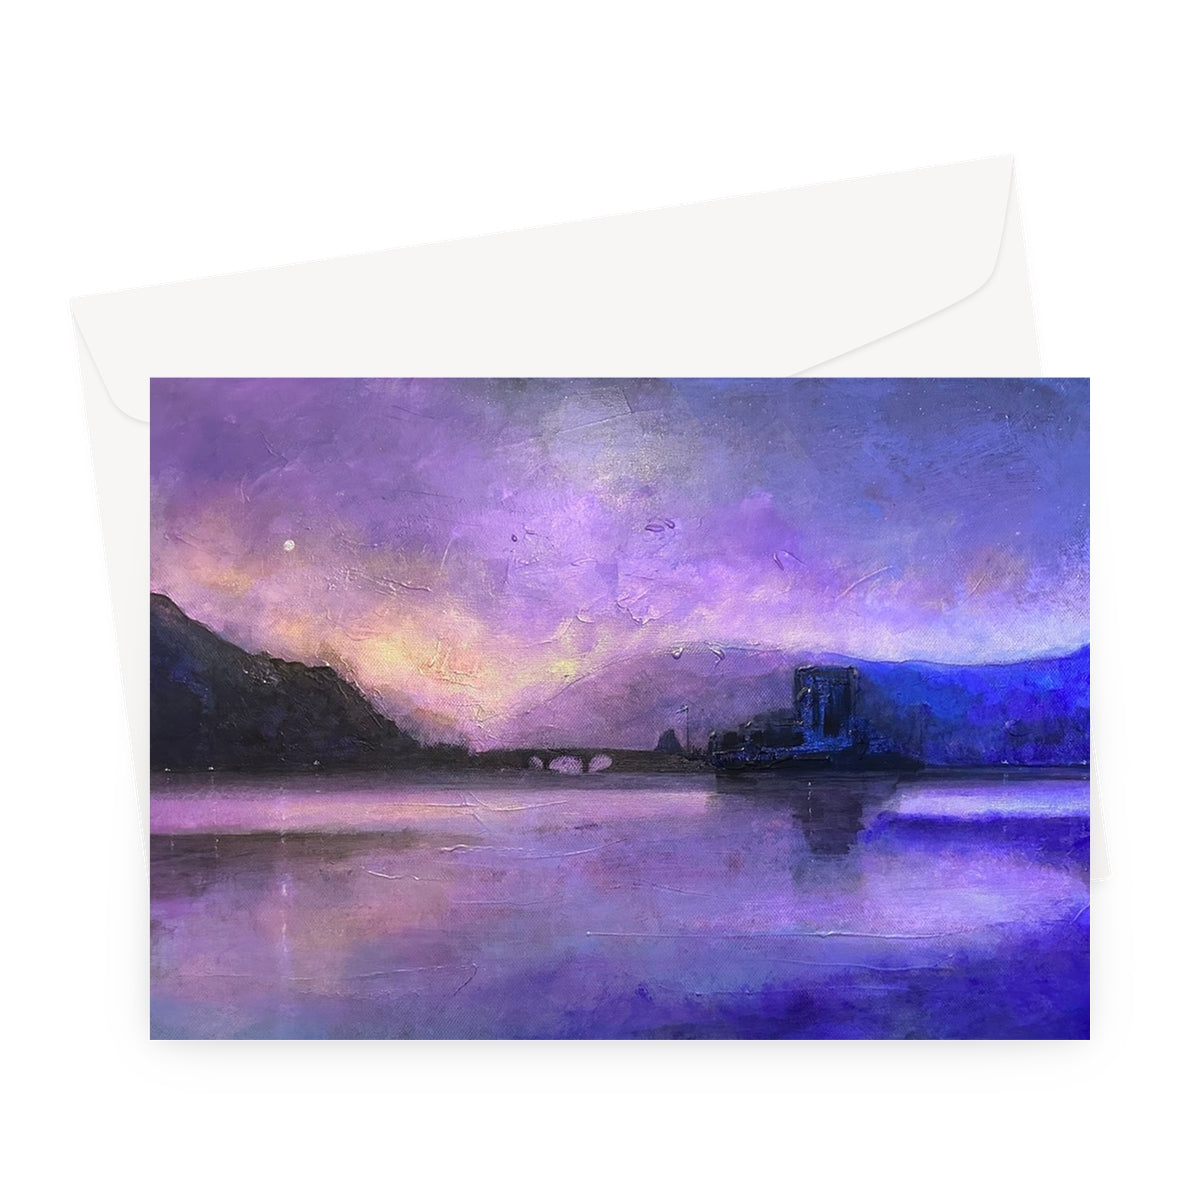 Eilean Donan Castle Moonset Art Gifts Greeting Card-Greetings Cards-Historic & Iconic Scotland Art Gallery-A5 Landscape-1 Card-Paintings, Prints, Homeware, Art Gifts From Scotland By Scottish Artist Kevin Hunter